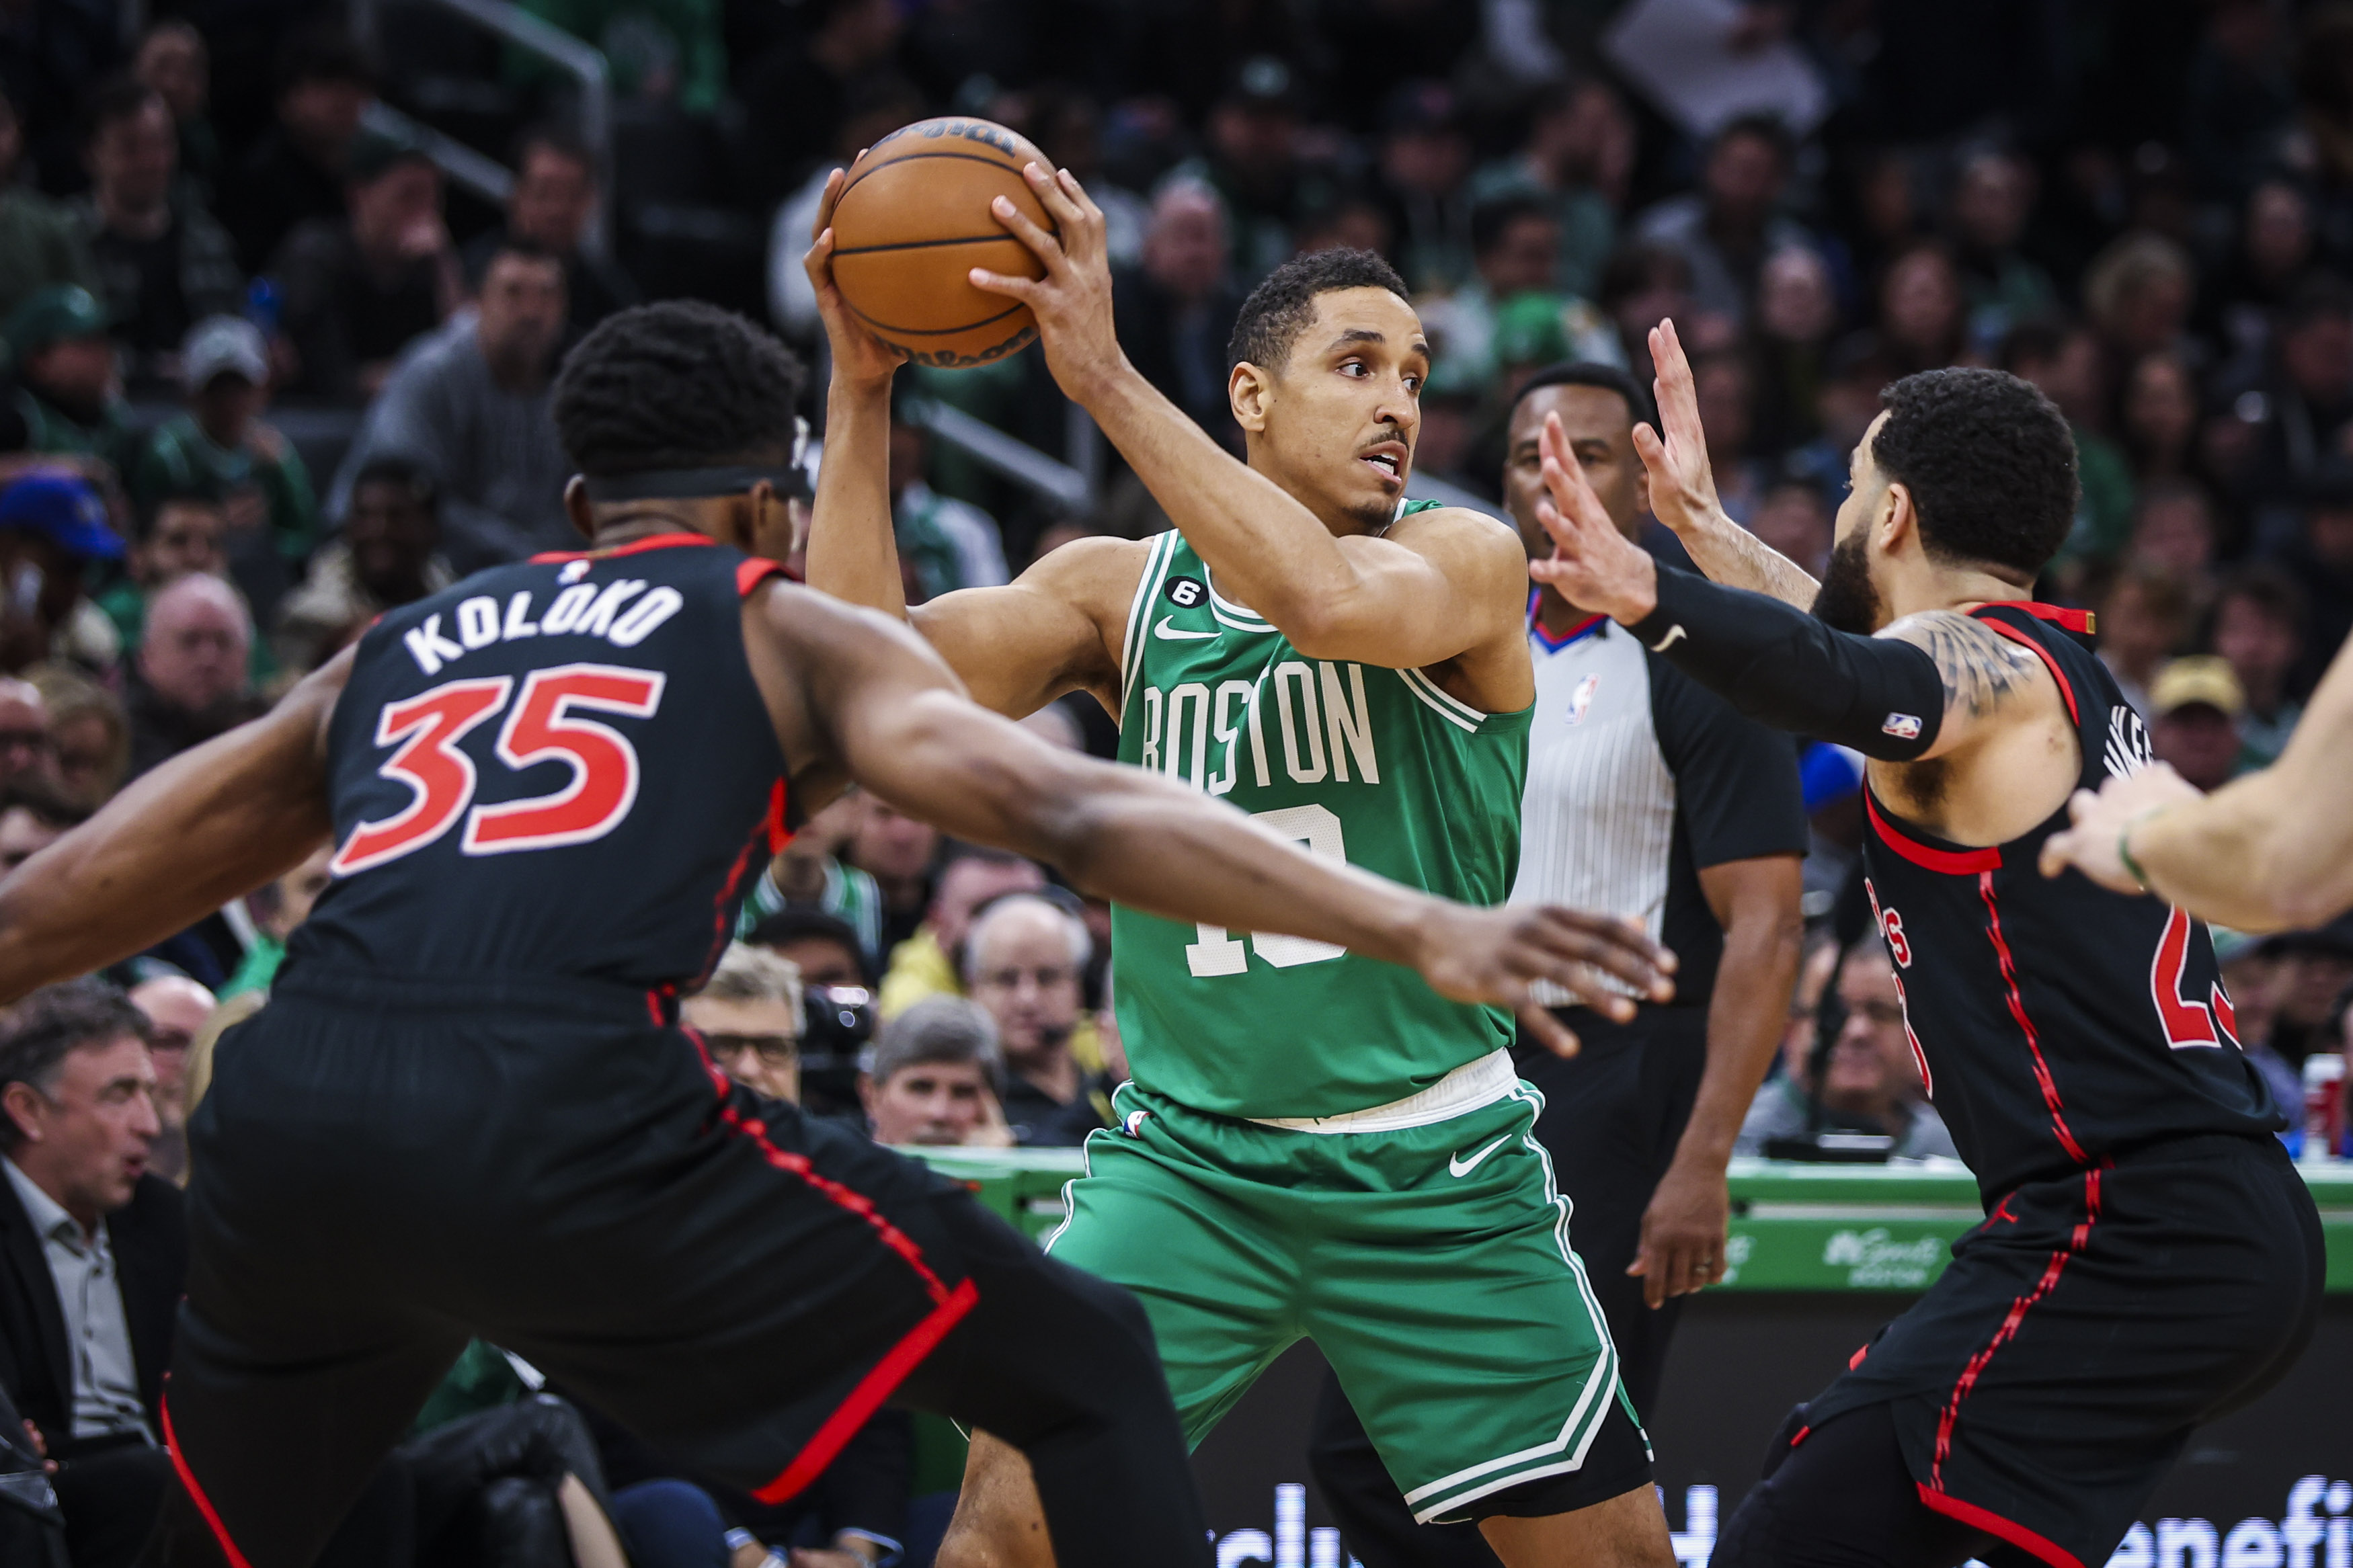 Malcolm Brogdon on joining Celtics: 'I'm looking to win a